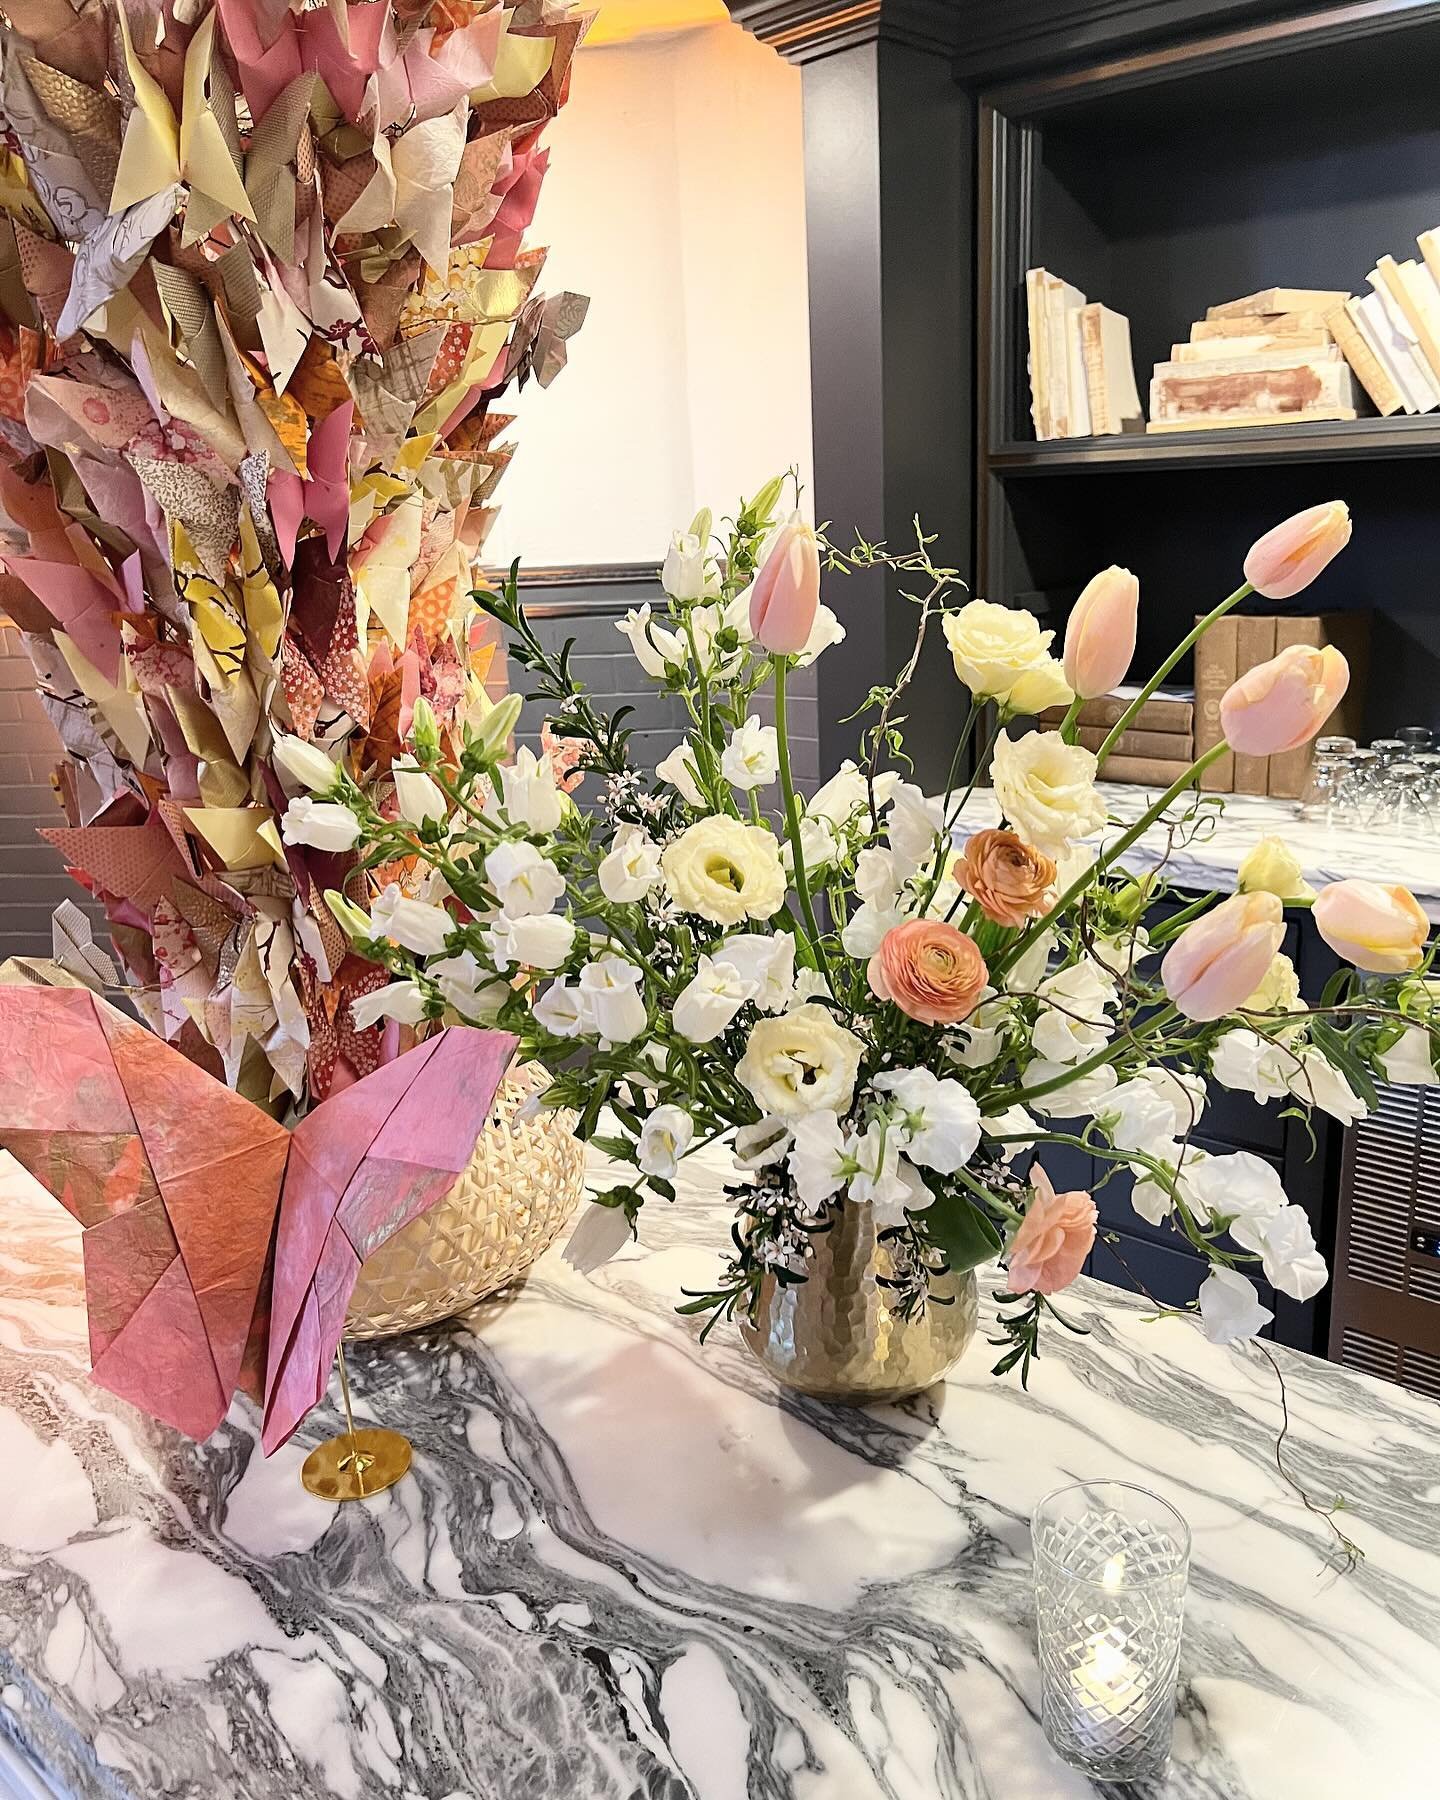 We had the unique opportunity to collaborate with a paper artist on a recent event. The client wanted to incorporate origami into their spring florals. @sarahfarrellkramer made some incredible paper selections, sculptures&hellip; and my personal favo